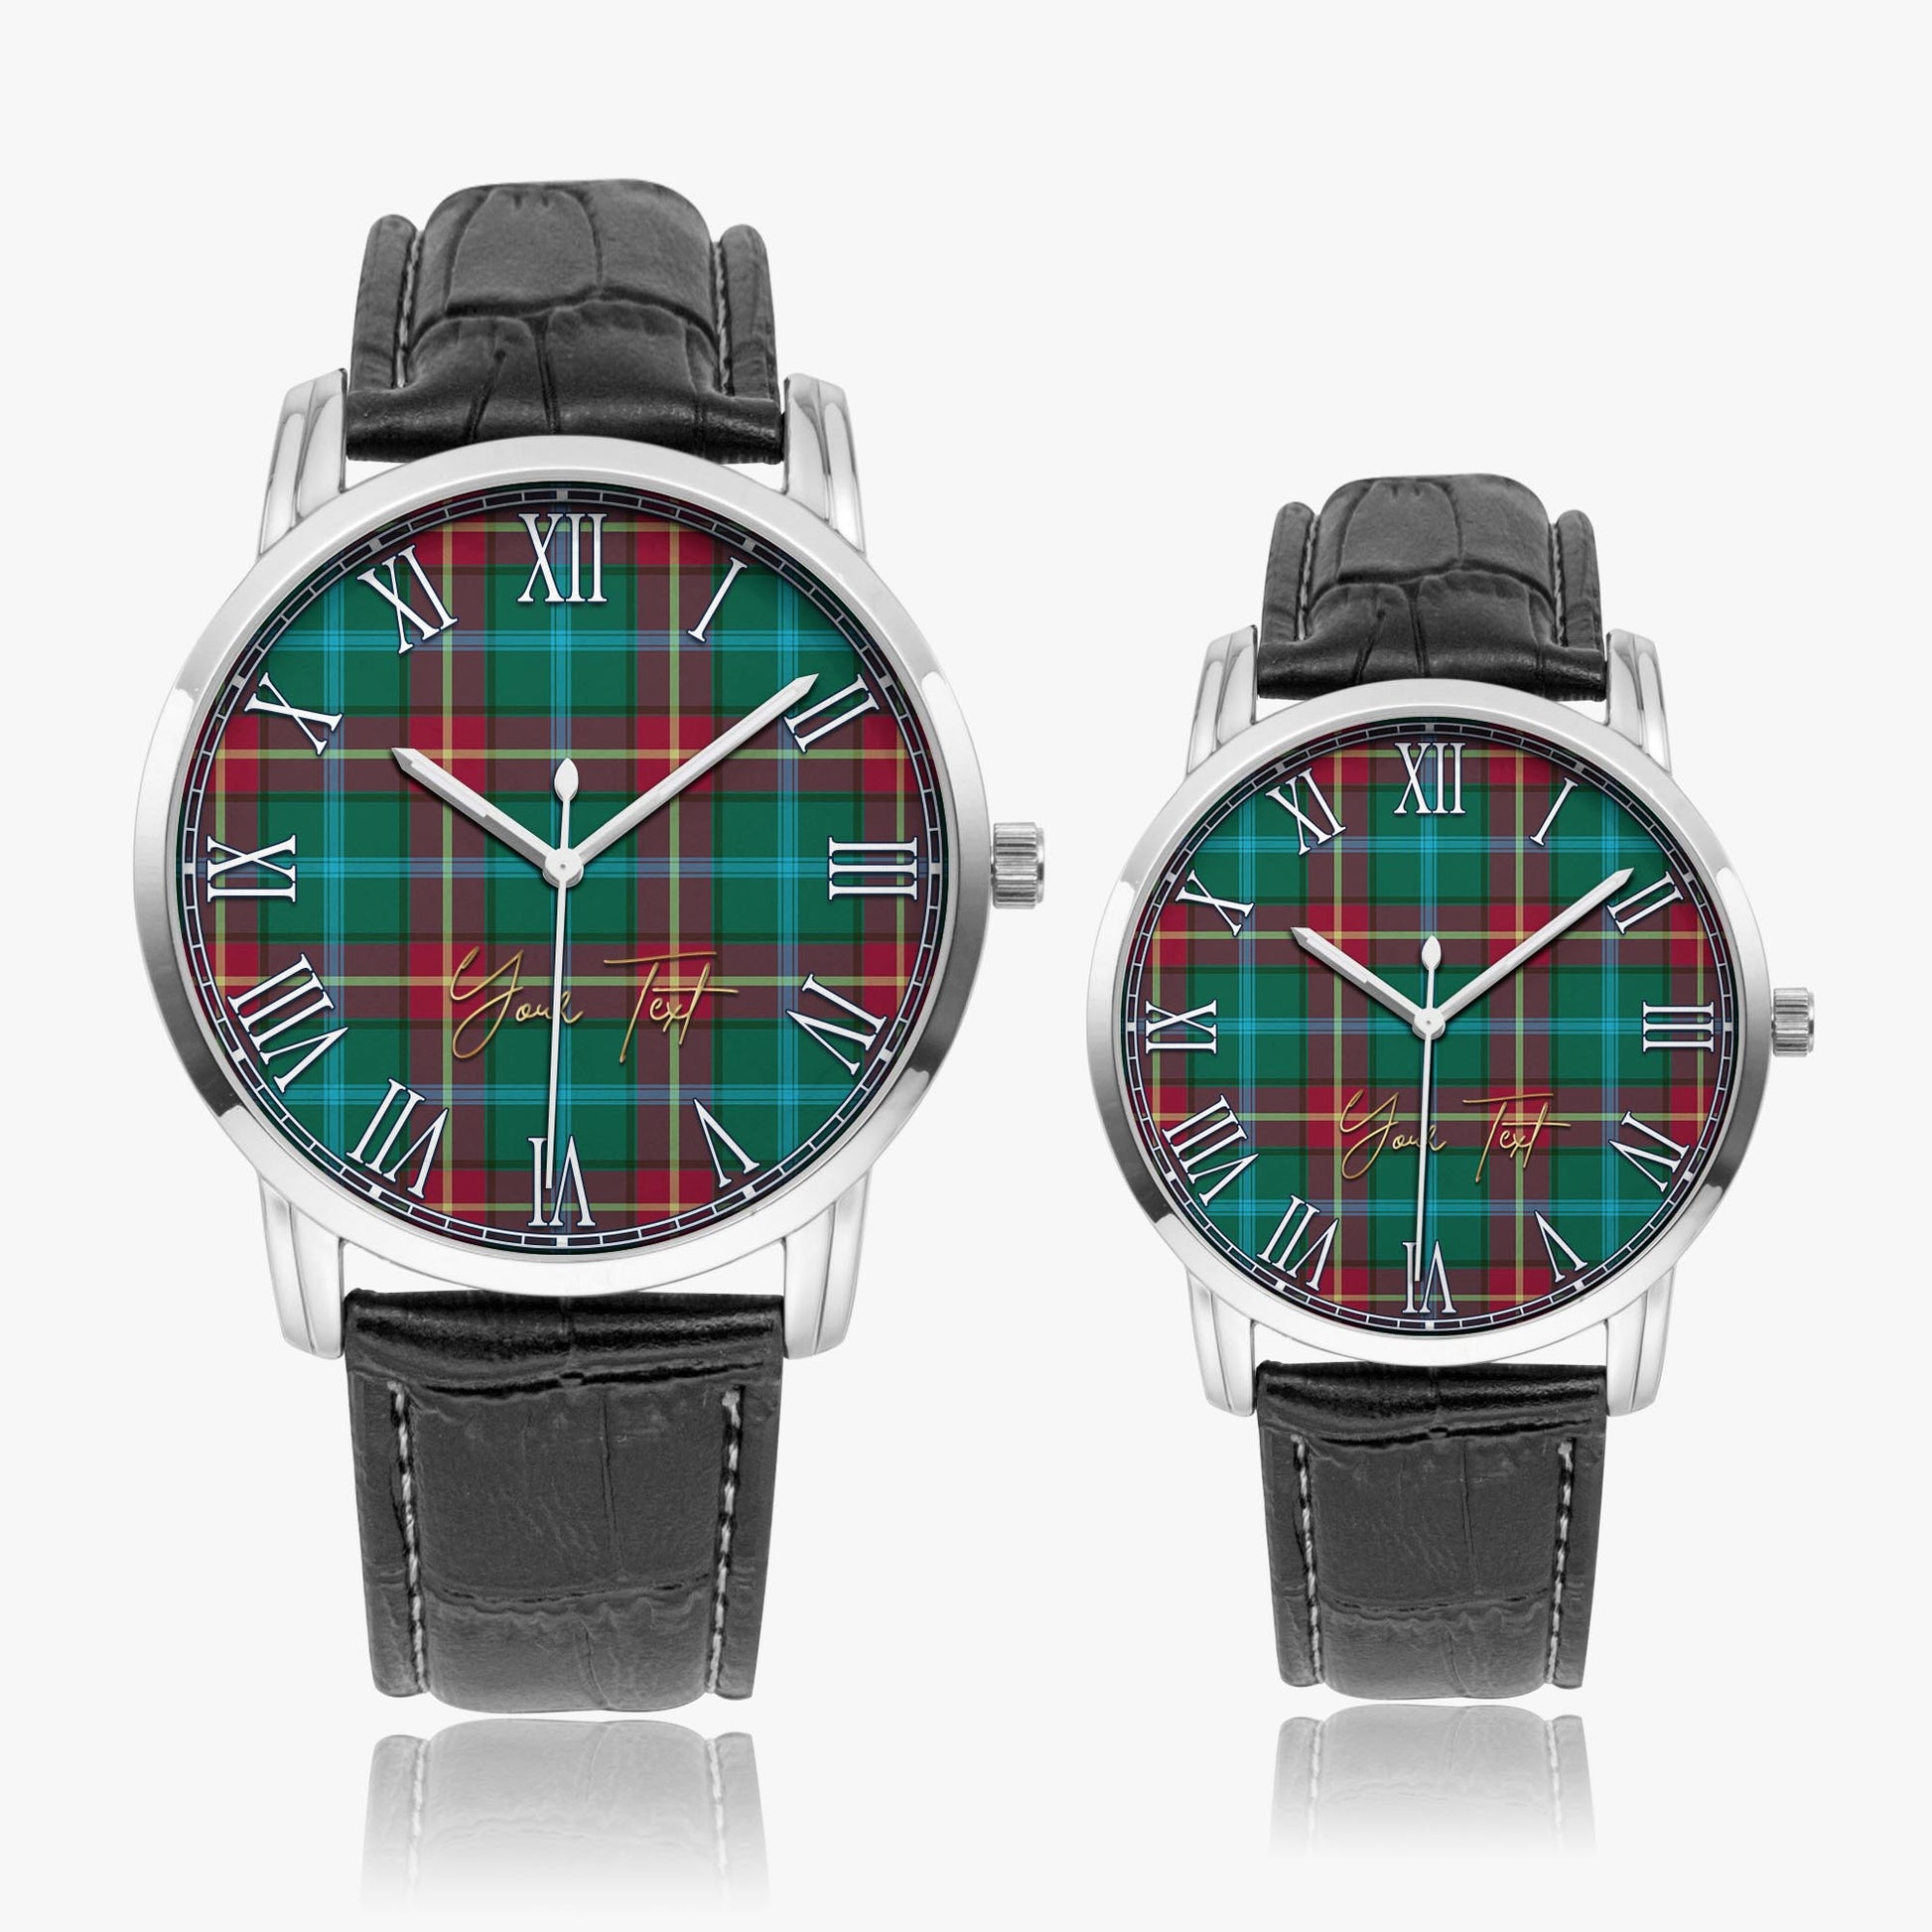 Manitoba Province Canada Tartan Personalized Your Text Leather Trap Quartz Watch Wide Type Silver Case With Black Leather Strap - Tartanvibesclothing